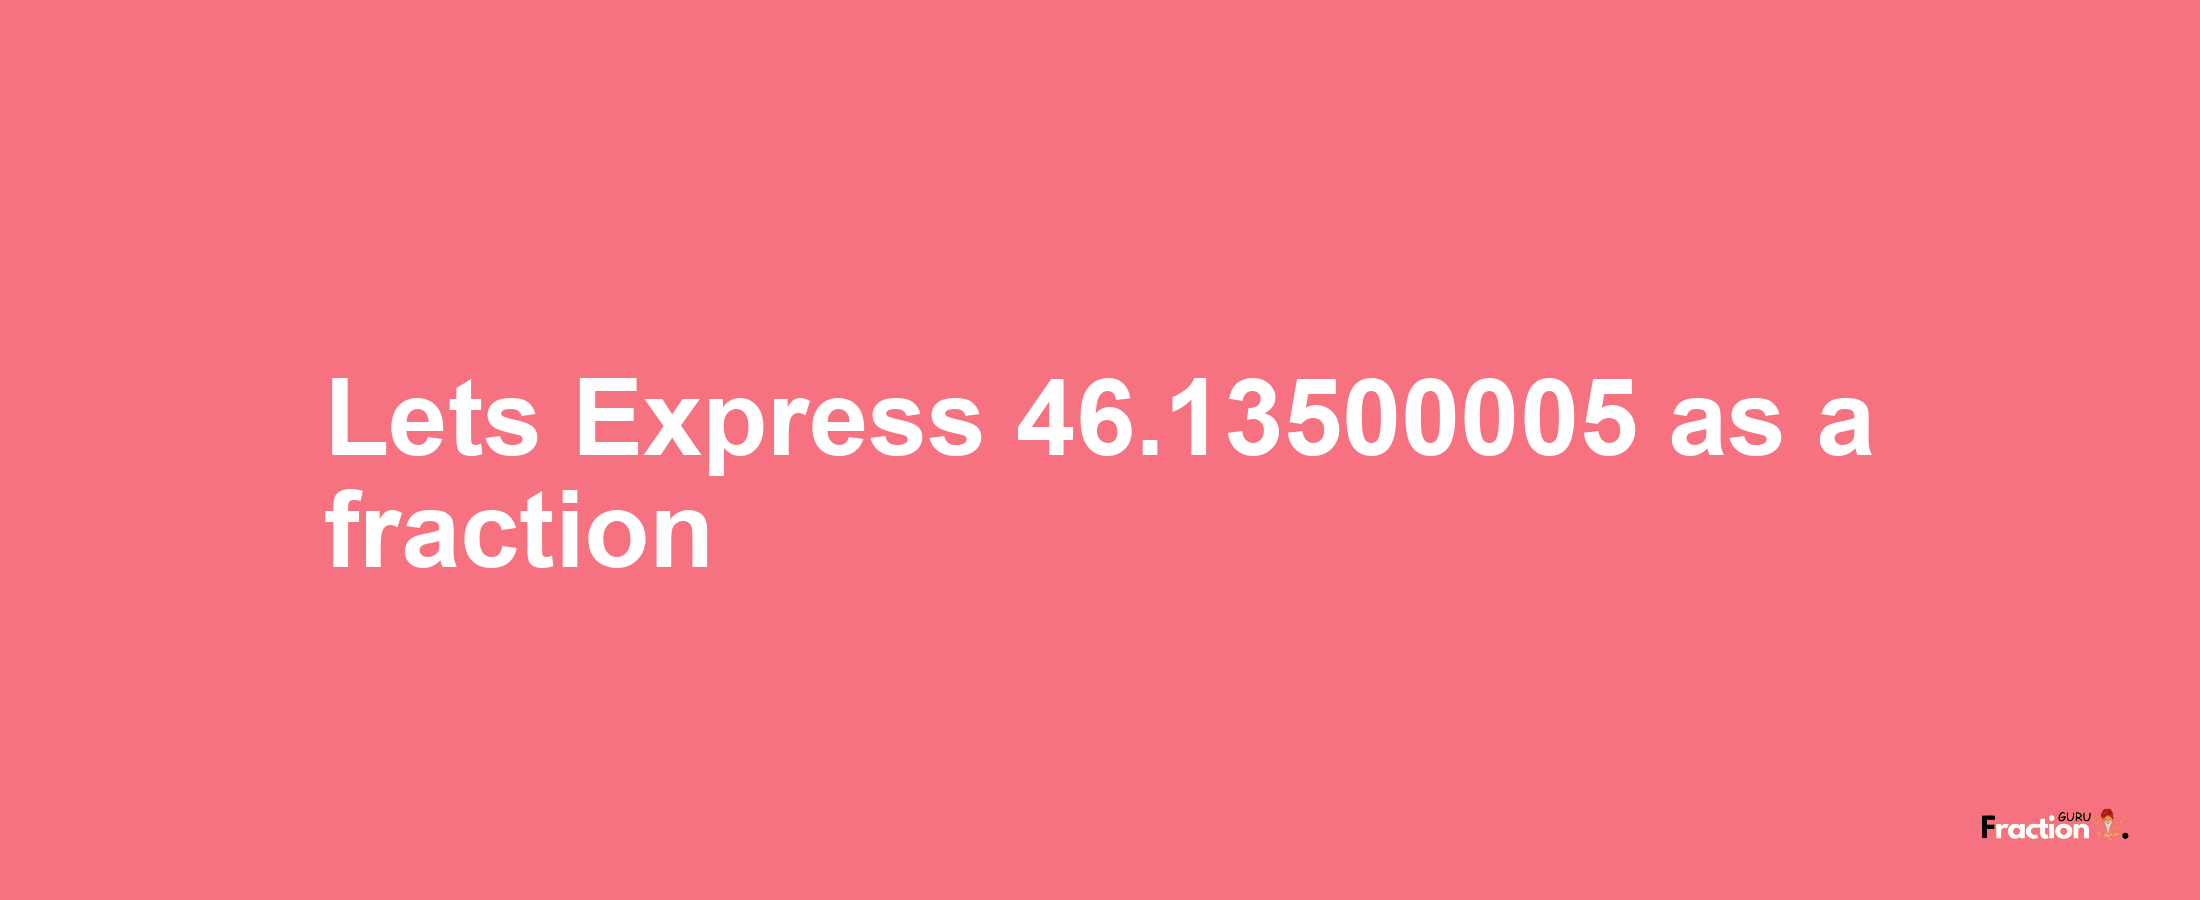 Lets Express 46.13500005 as afraction